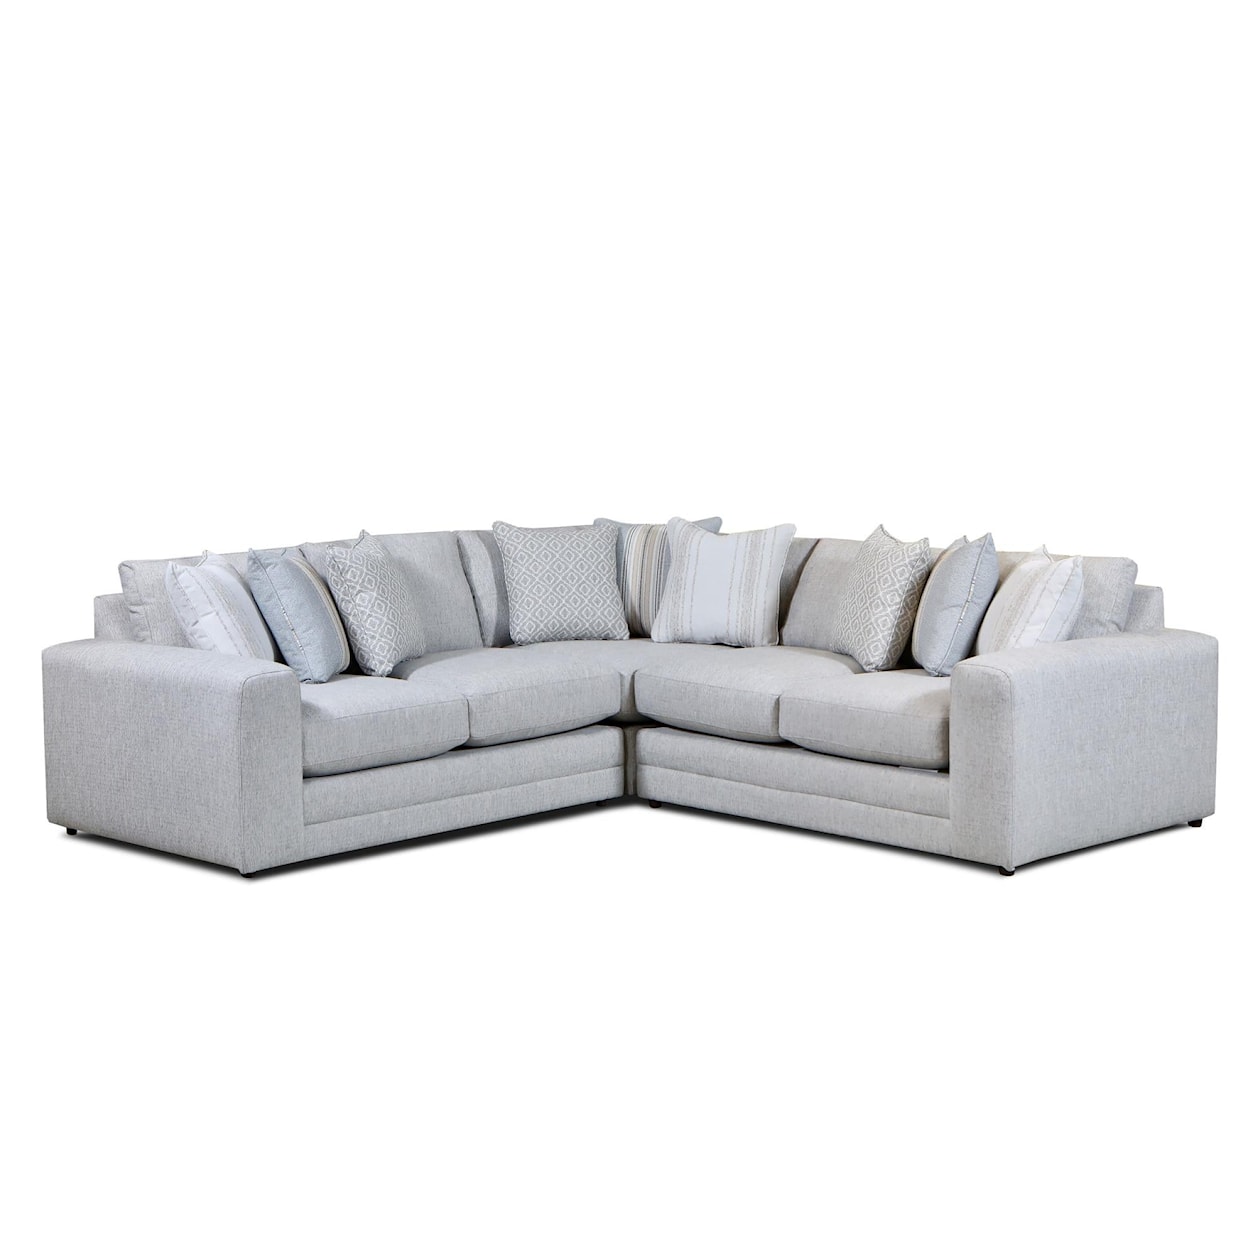 Fusion Furniture 7000 LIMELIGHT MINERAL Sectional